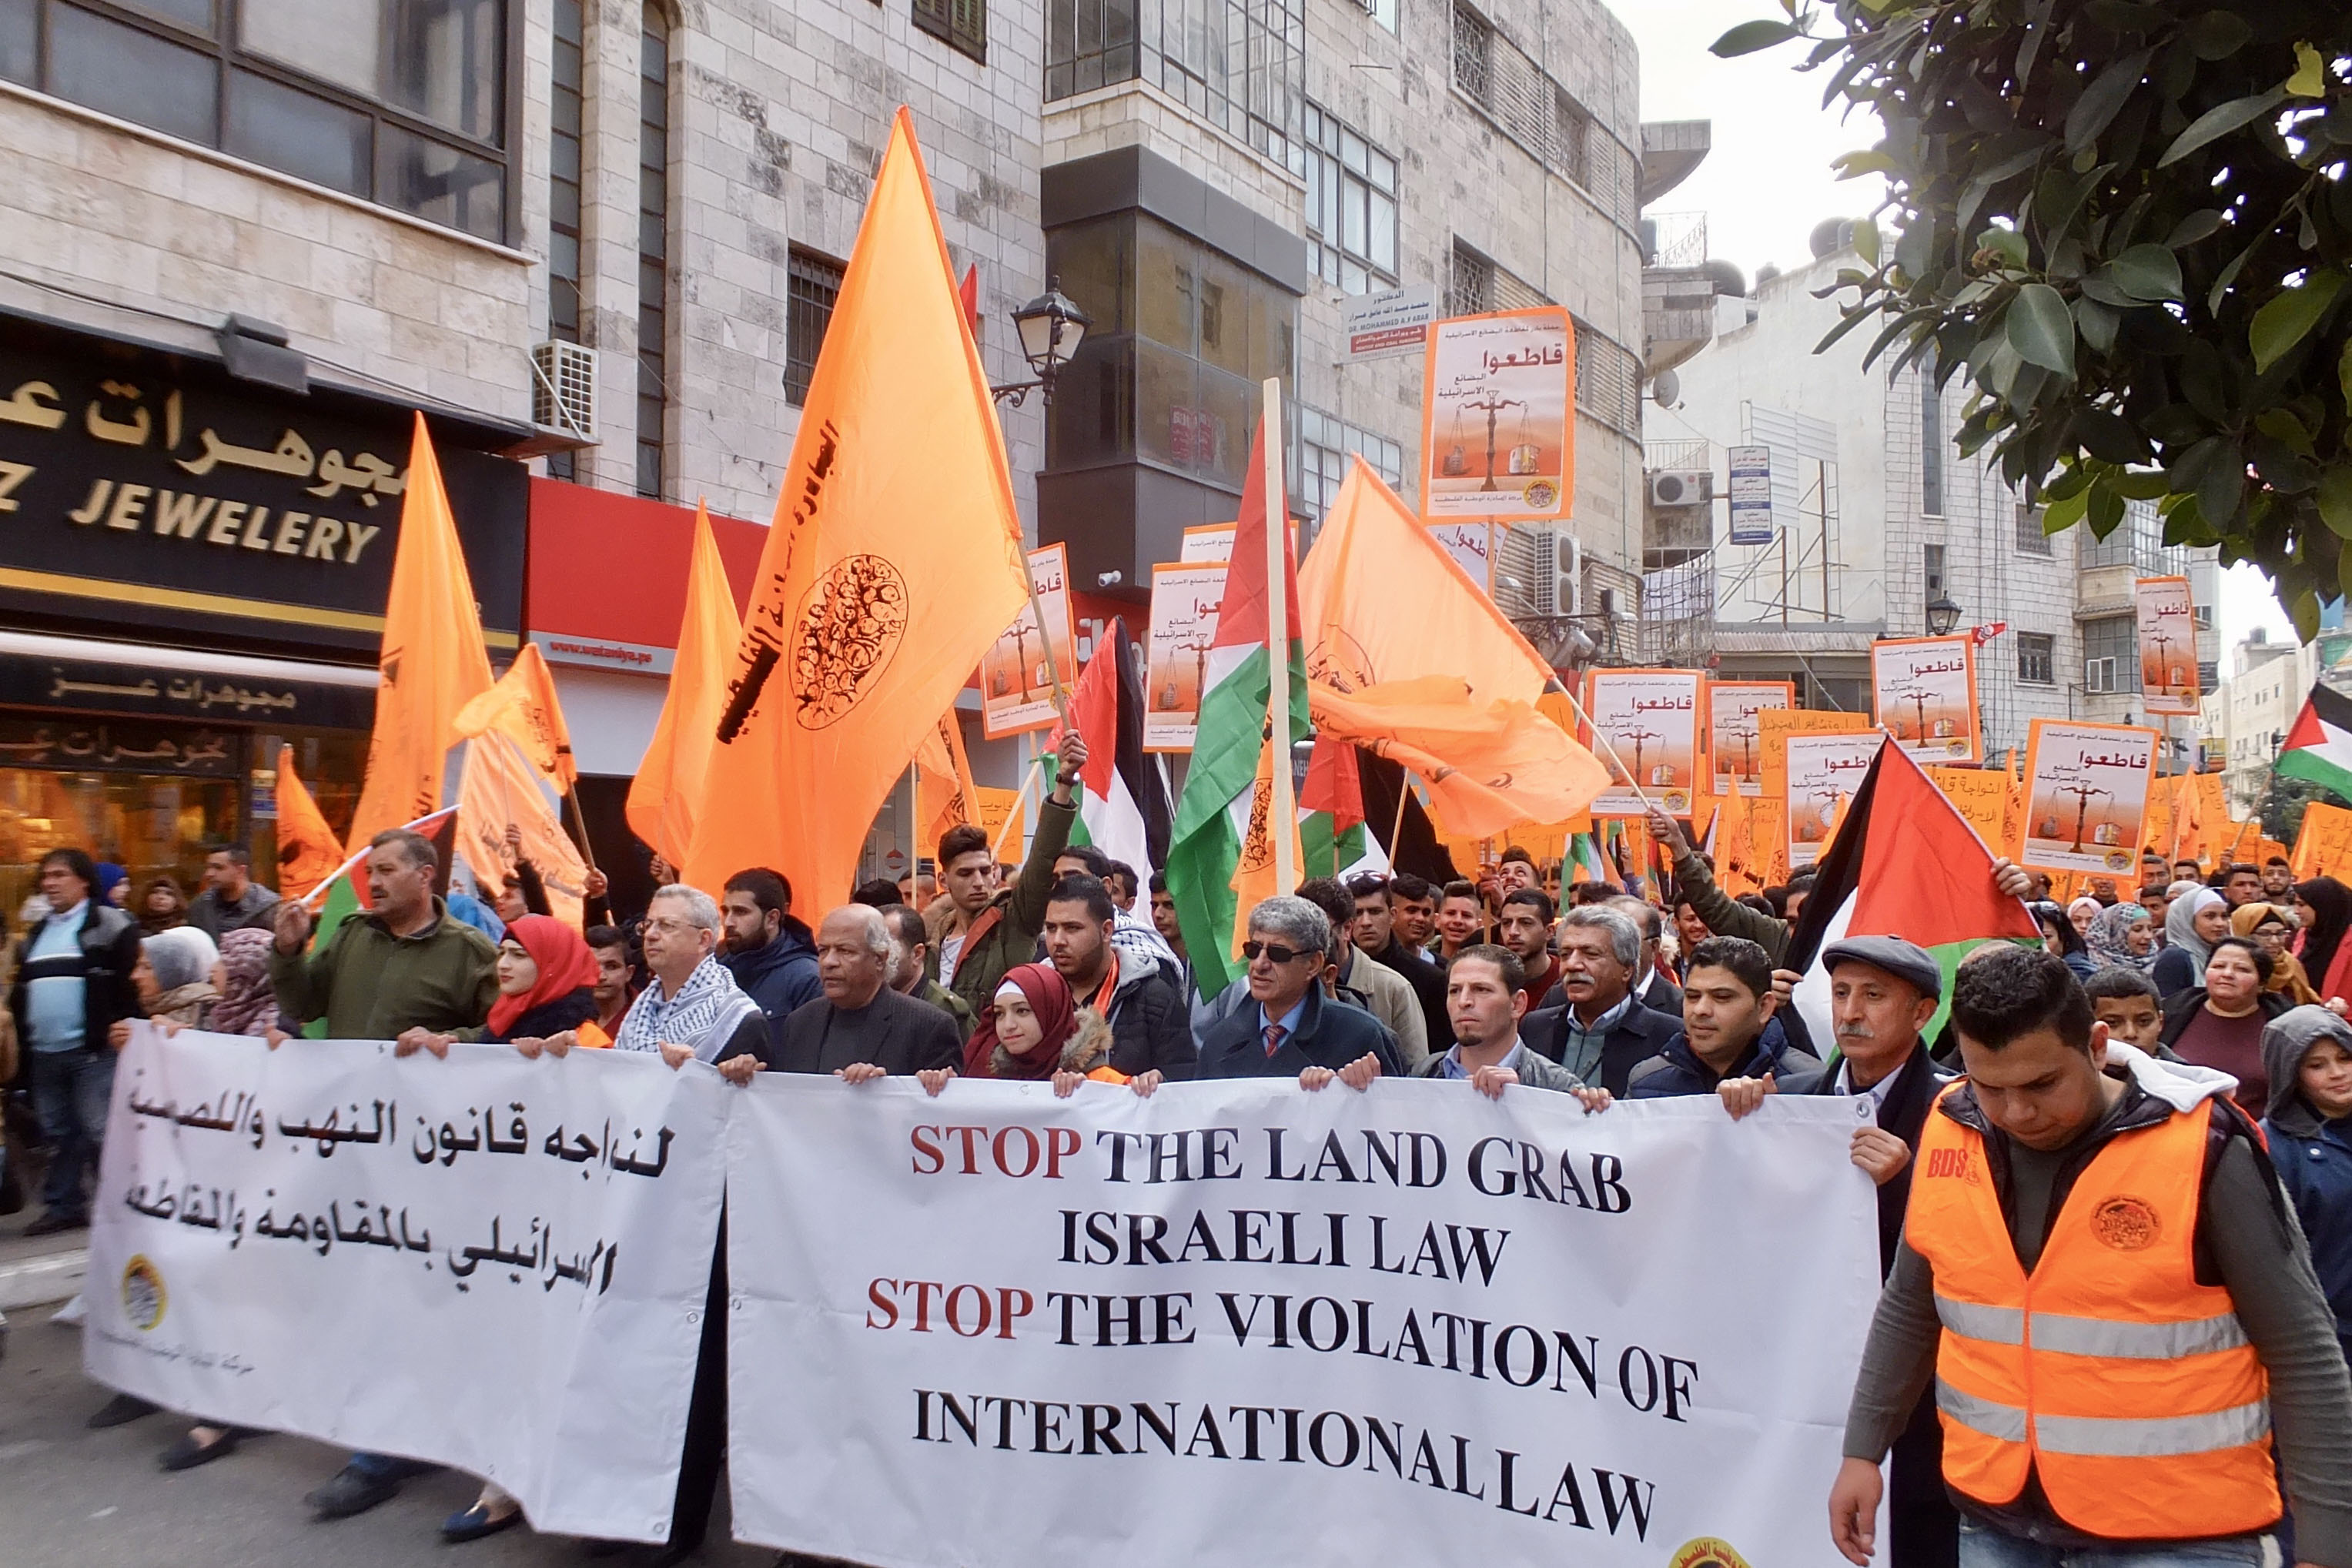 Palestinians take to the streets to call for boycott of Israeli goods